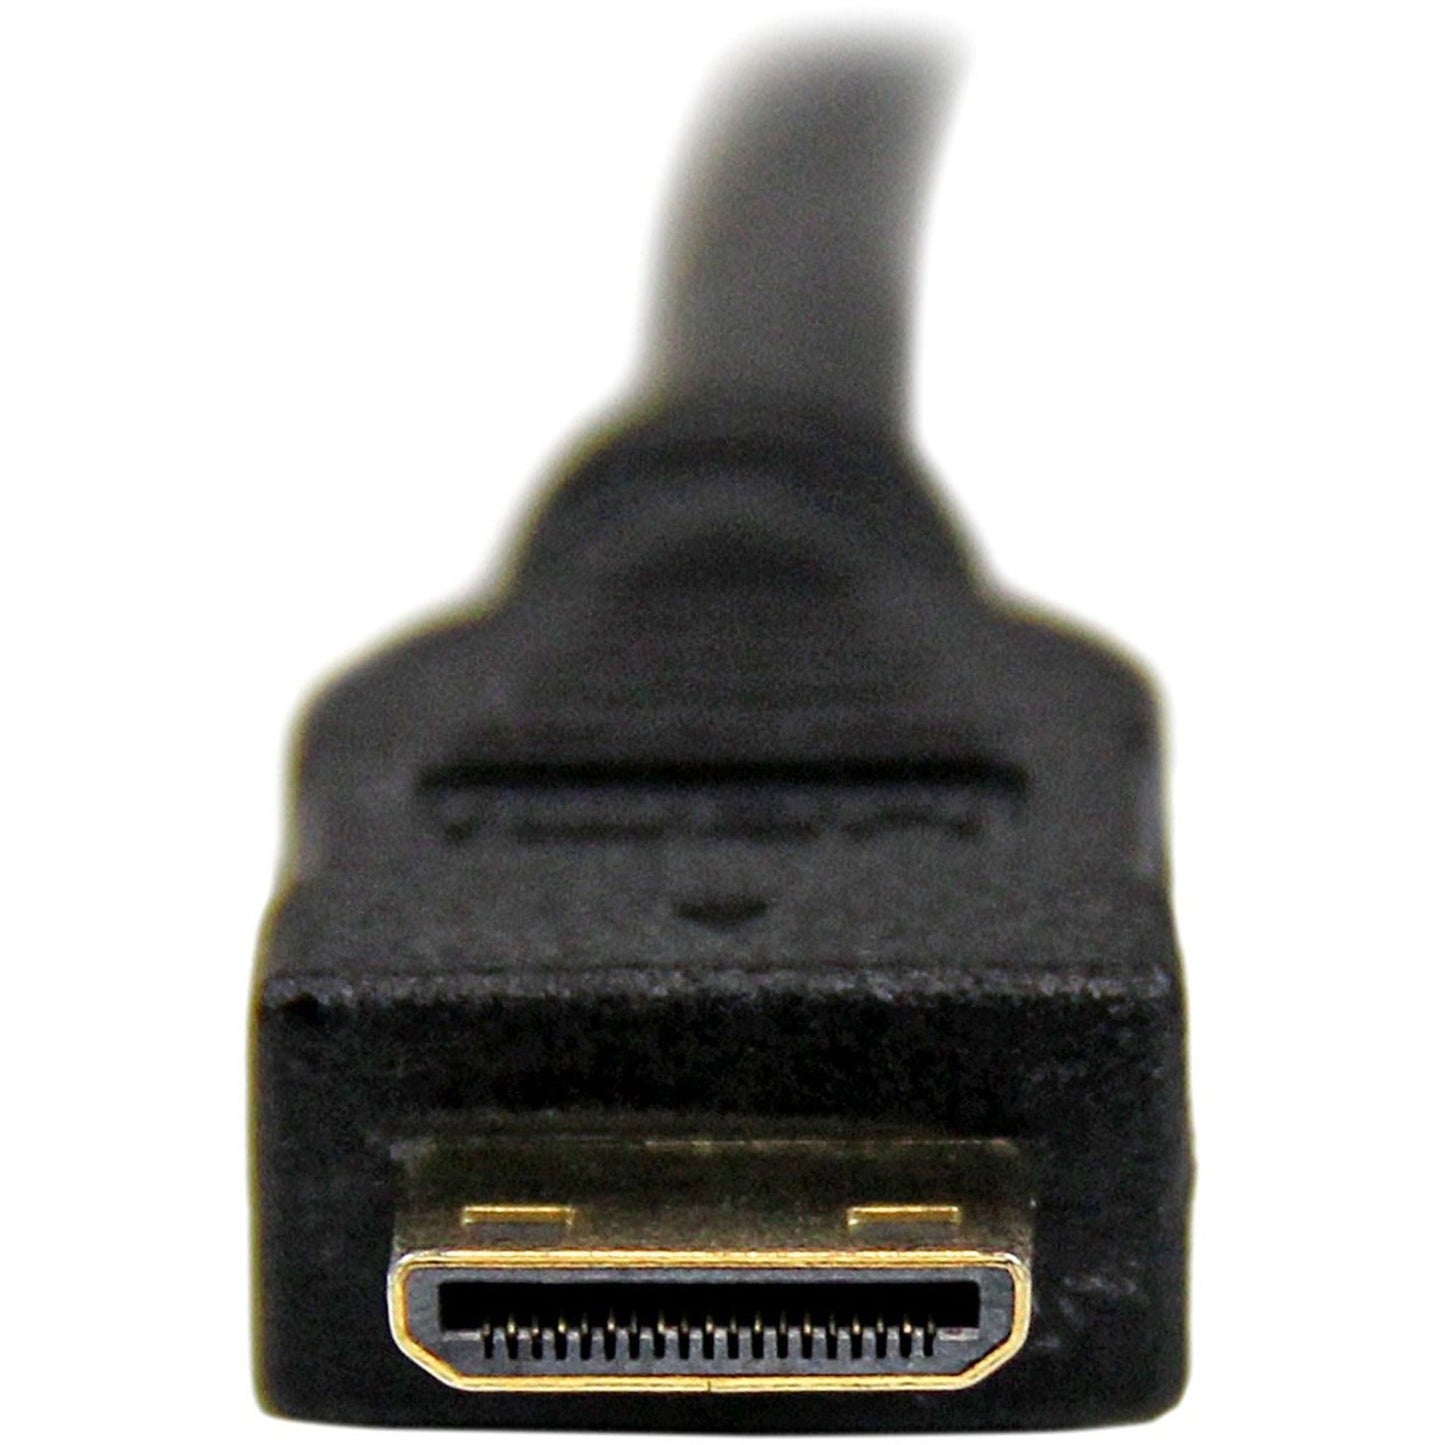 StarTech.com 1m (3.3 ft) Mini HDMI to DVI Cable DVI-D to HDMI Cable (1920x1200p) HDMI Mini Male to DVI-D Male Display Cable Adapter